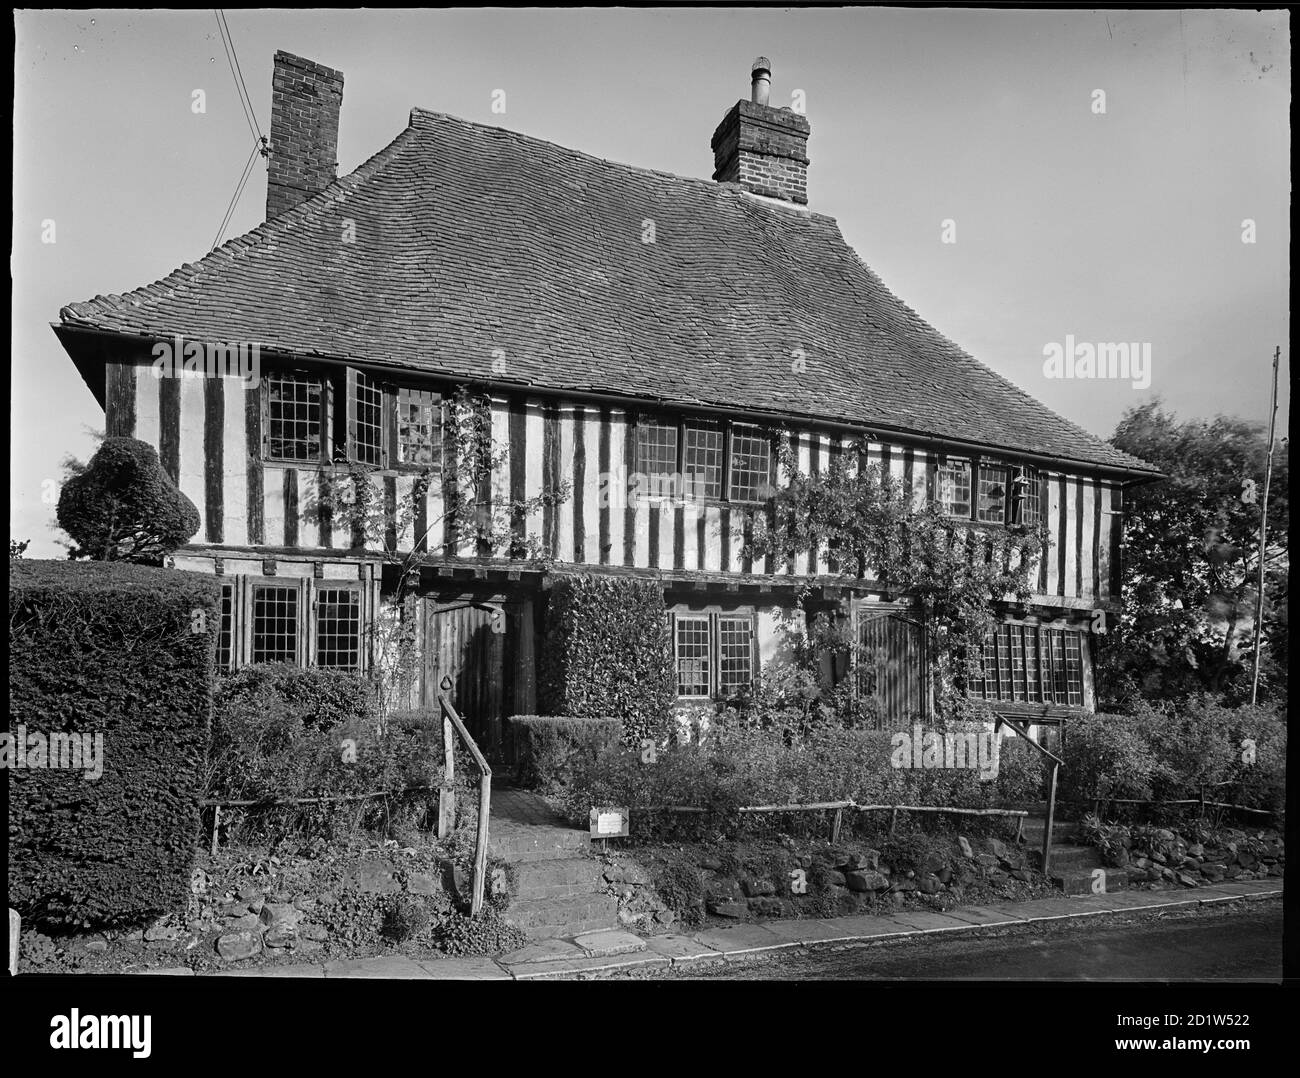 The exterior of Priest's House, Small Hythe Road, Small Hythe, Tenterden, Ashford, Kent, UK. Stock Photo